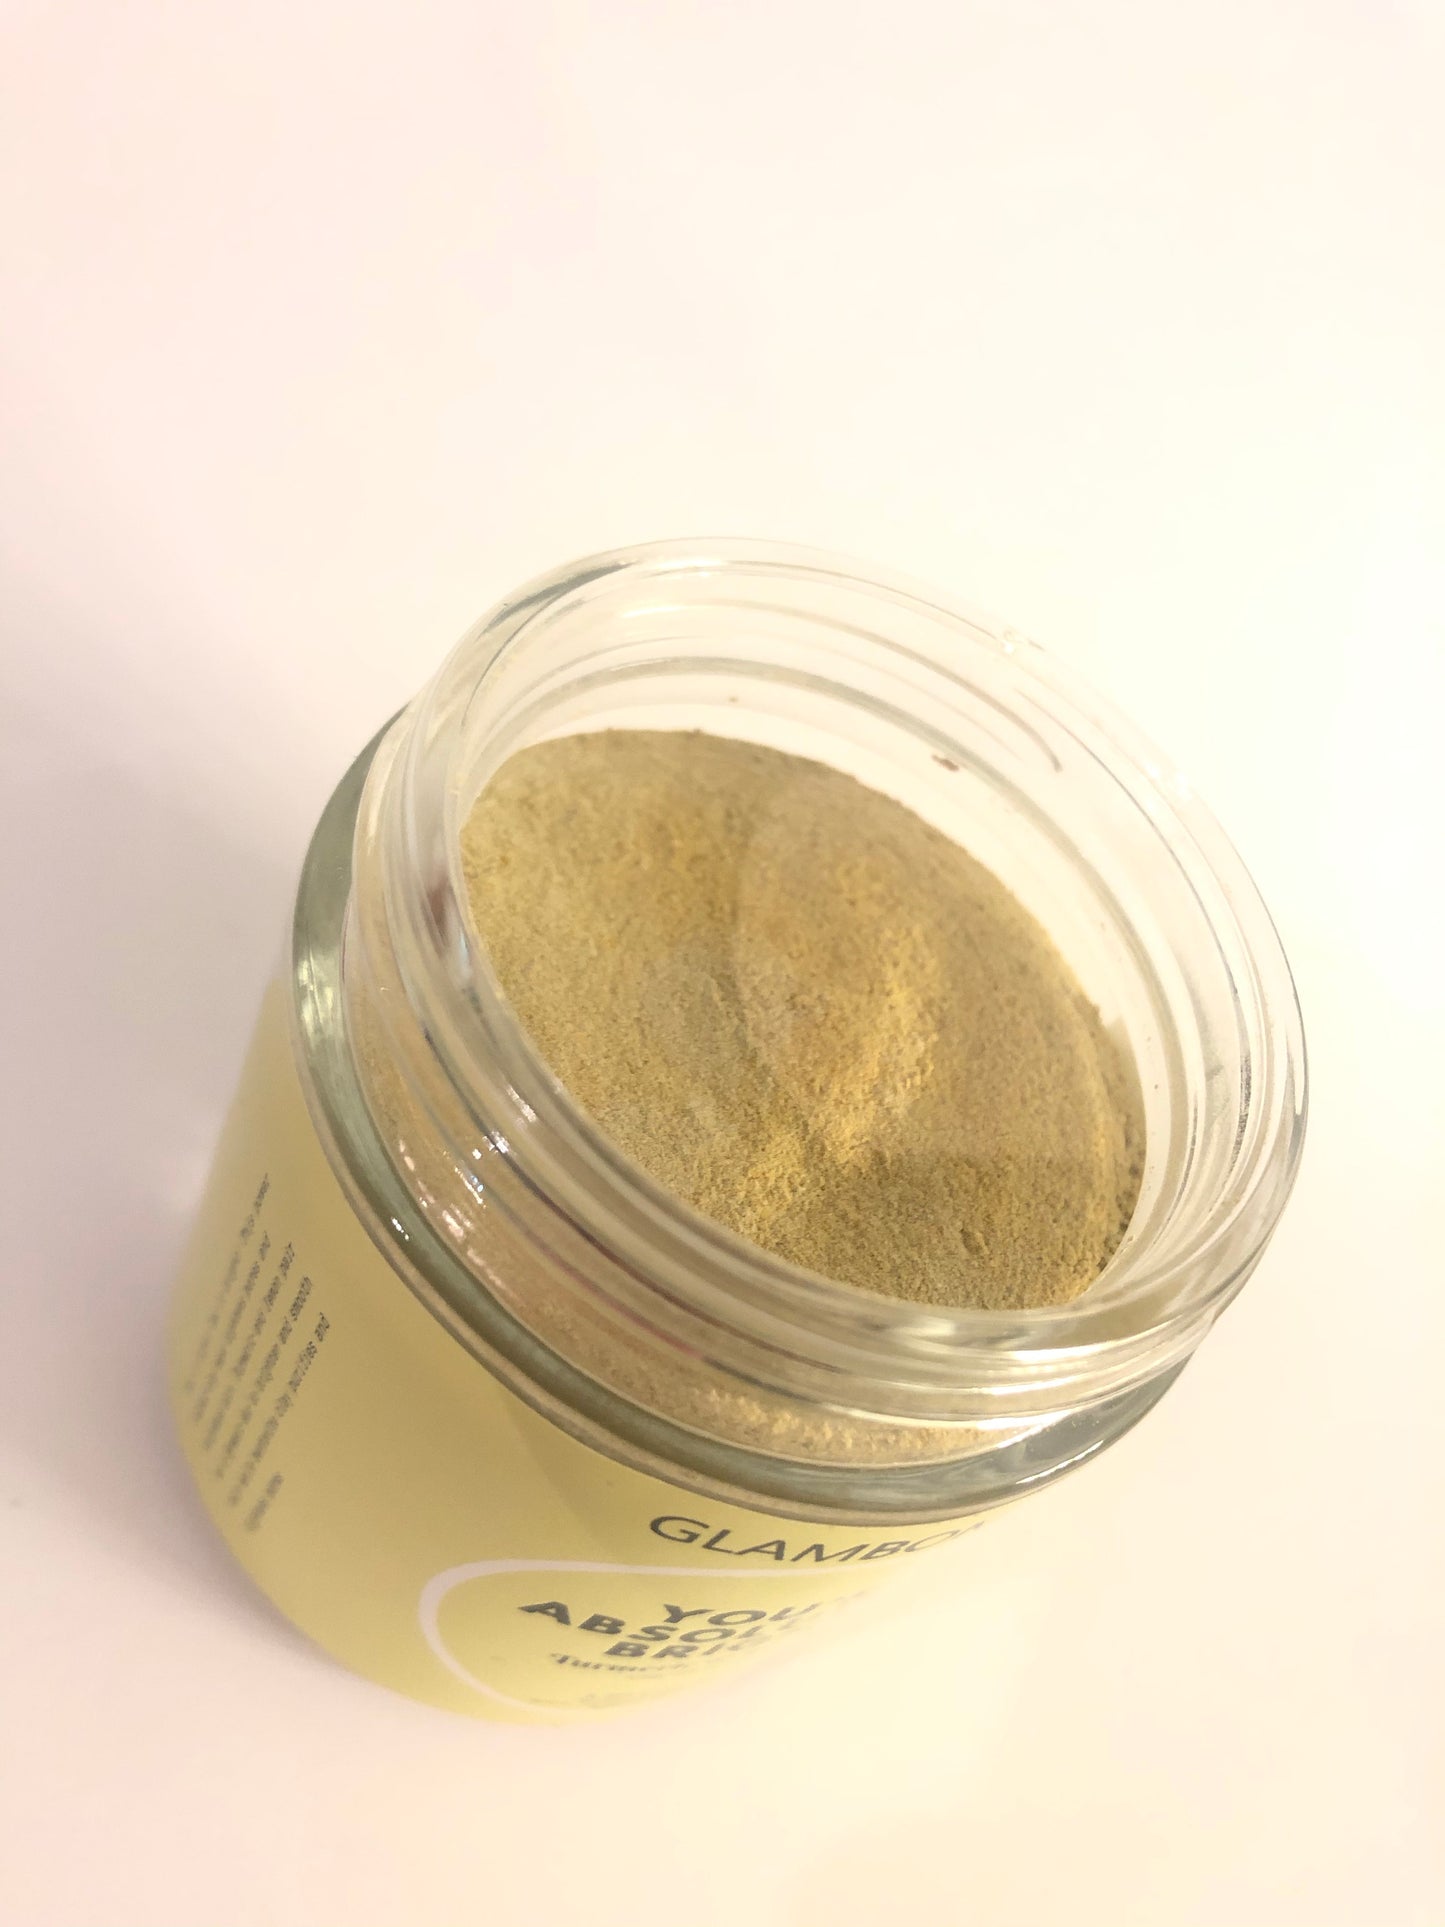 You’re Absolutely Bright Turmeric & Lemon Powder Face Mask